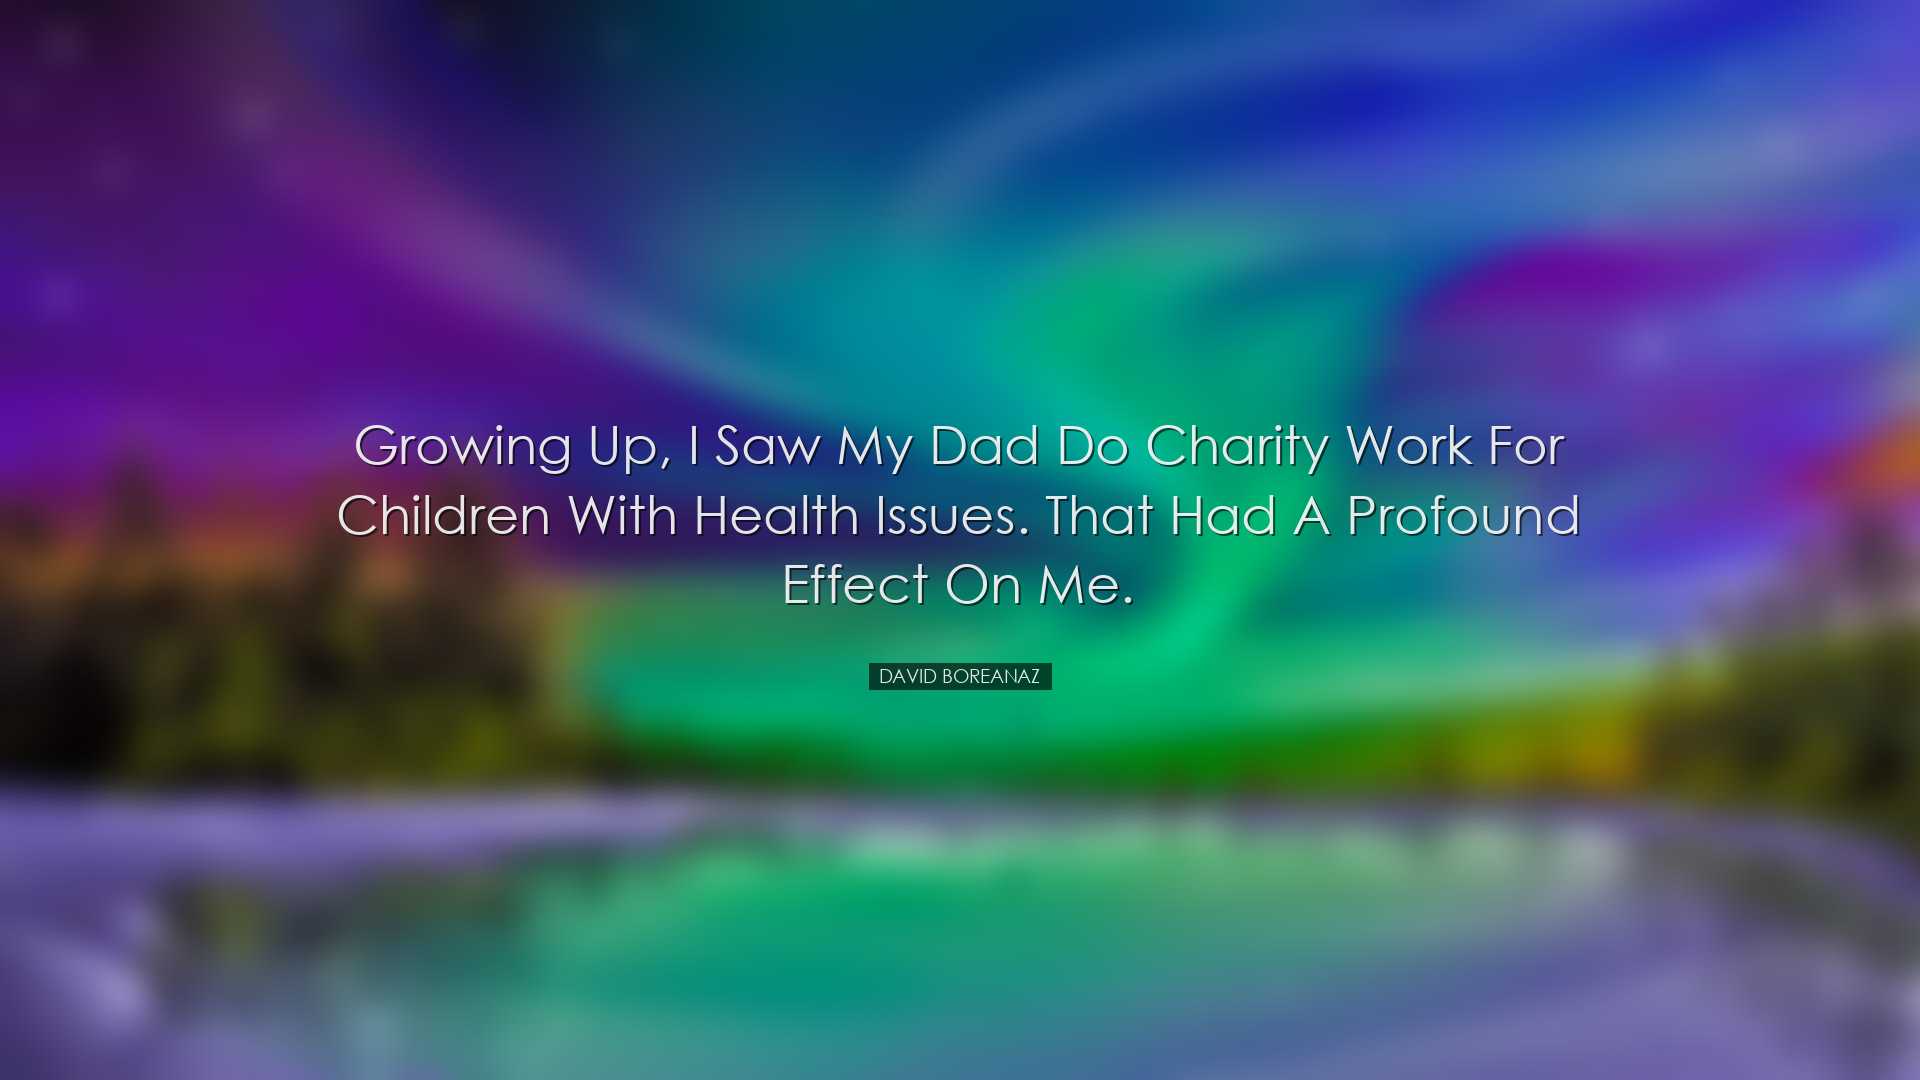 Growing up, I saw my dad do charity work for children with health